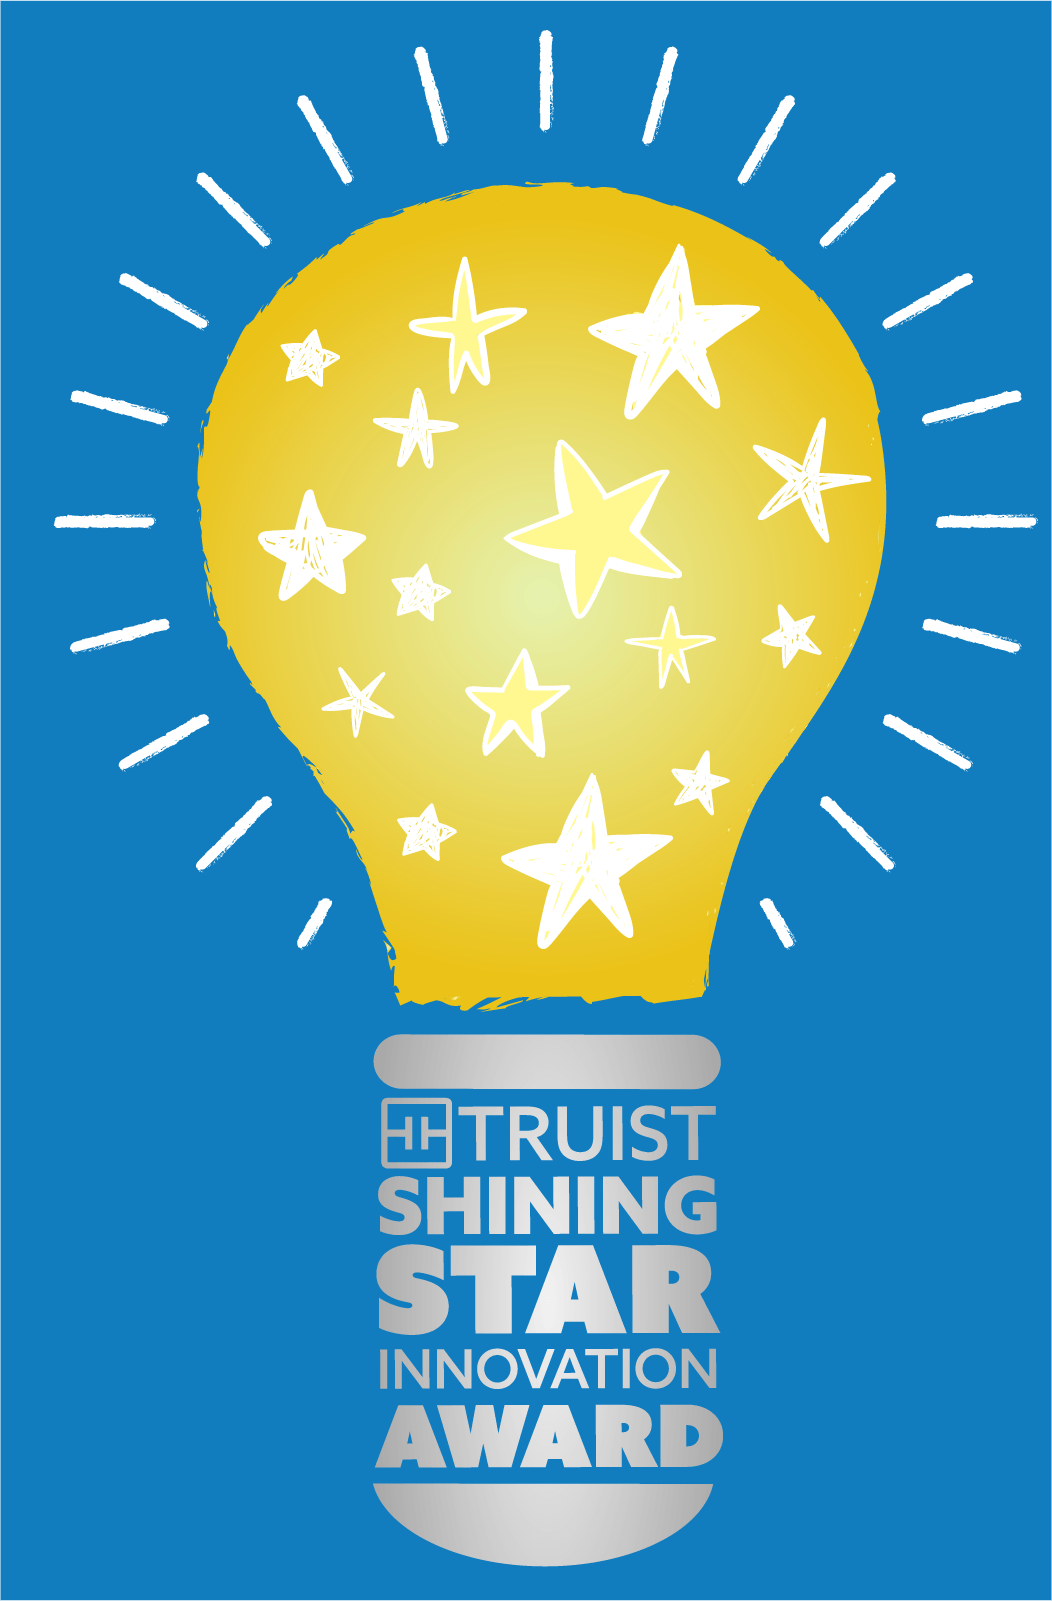 Image of light bulb with stars inside the glass globe. The light bulb threads are replaced by the words "Truist Shining Star Innovation Award"